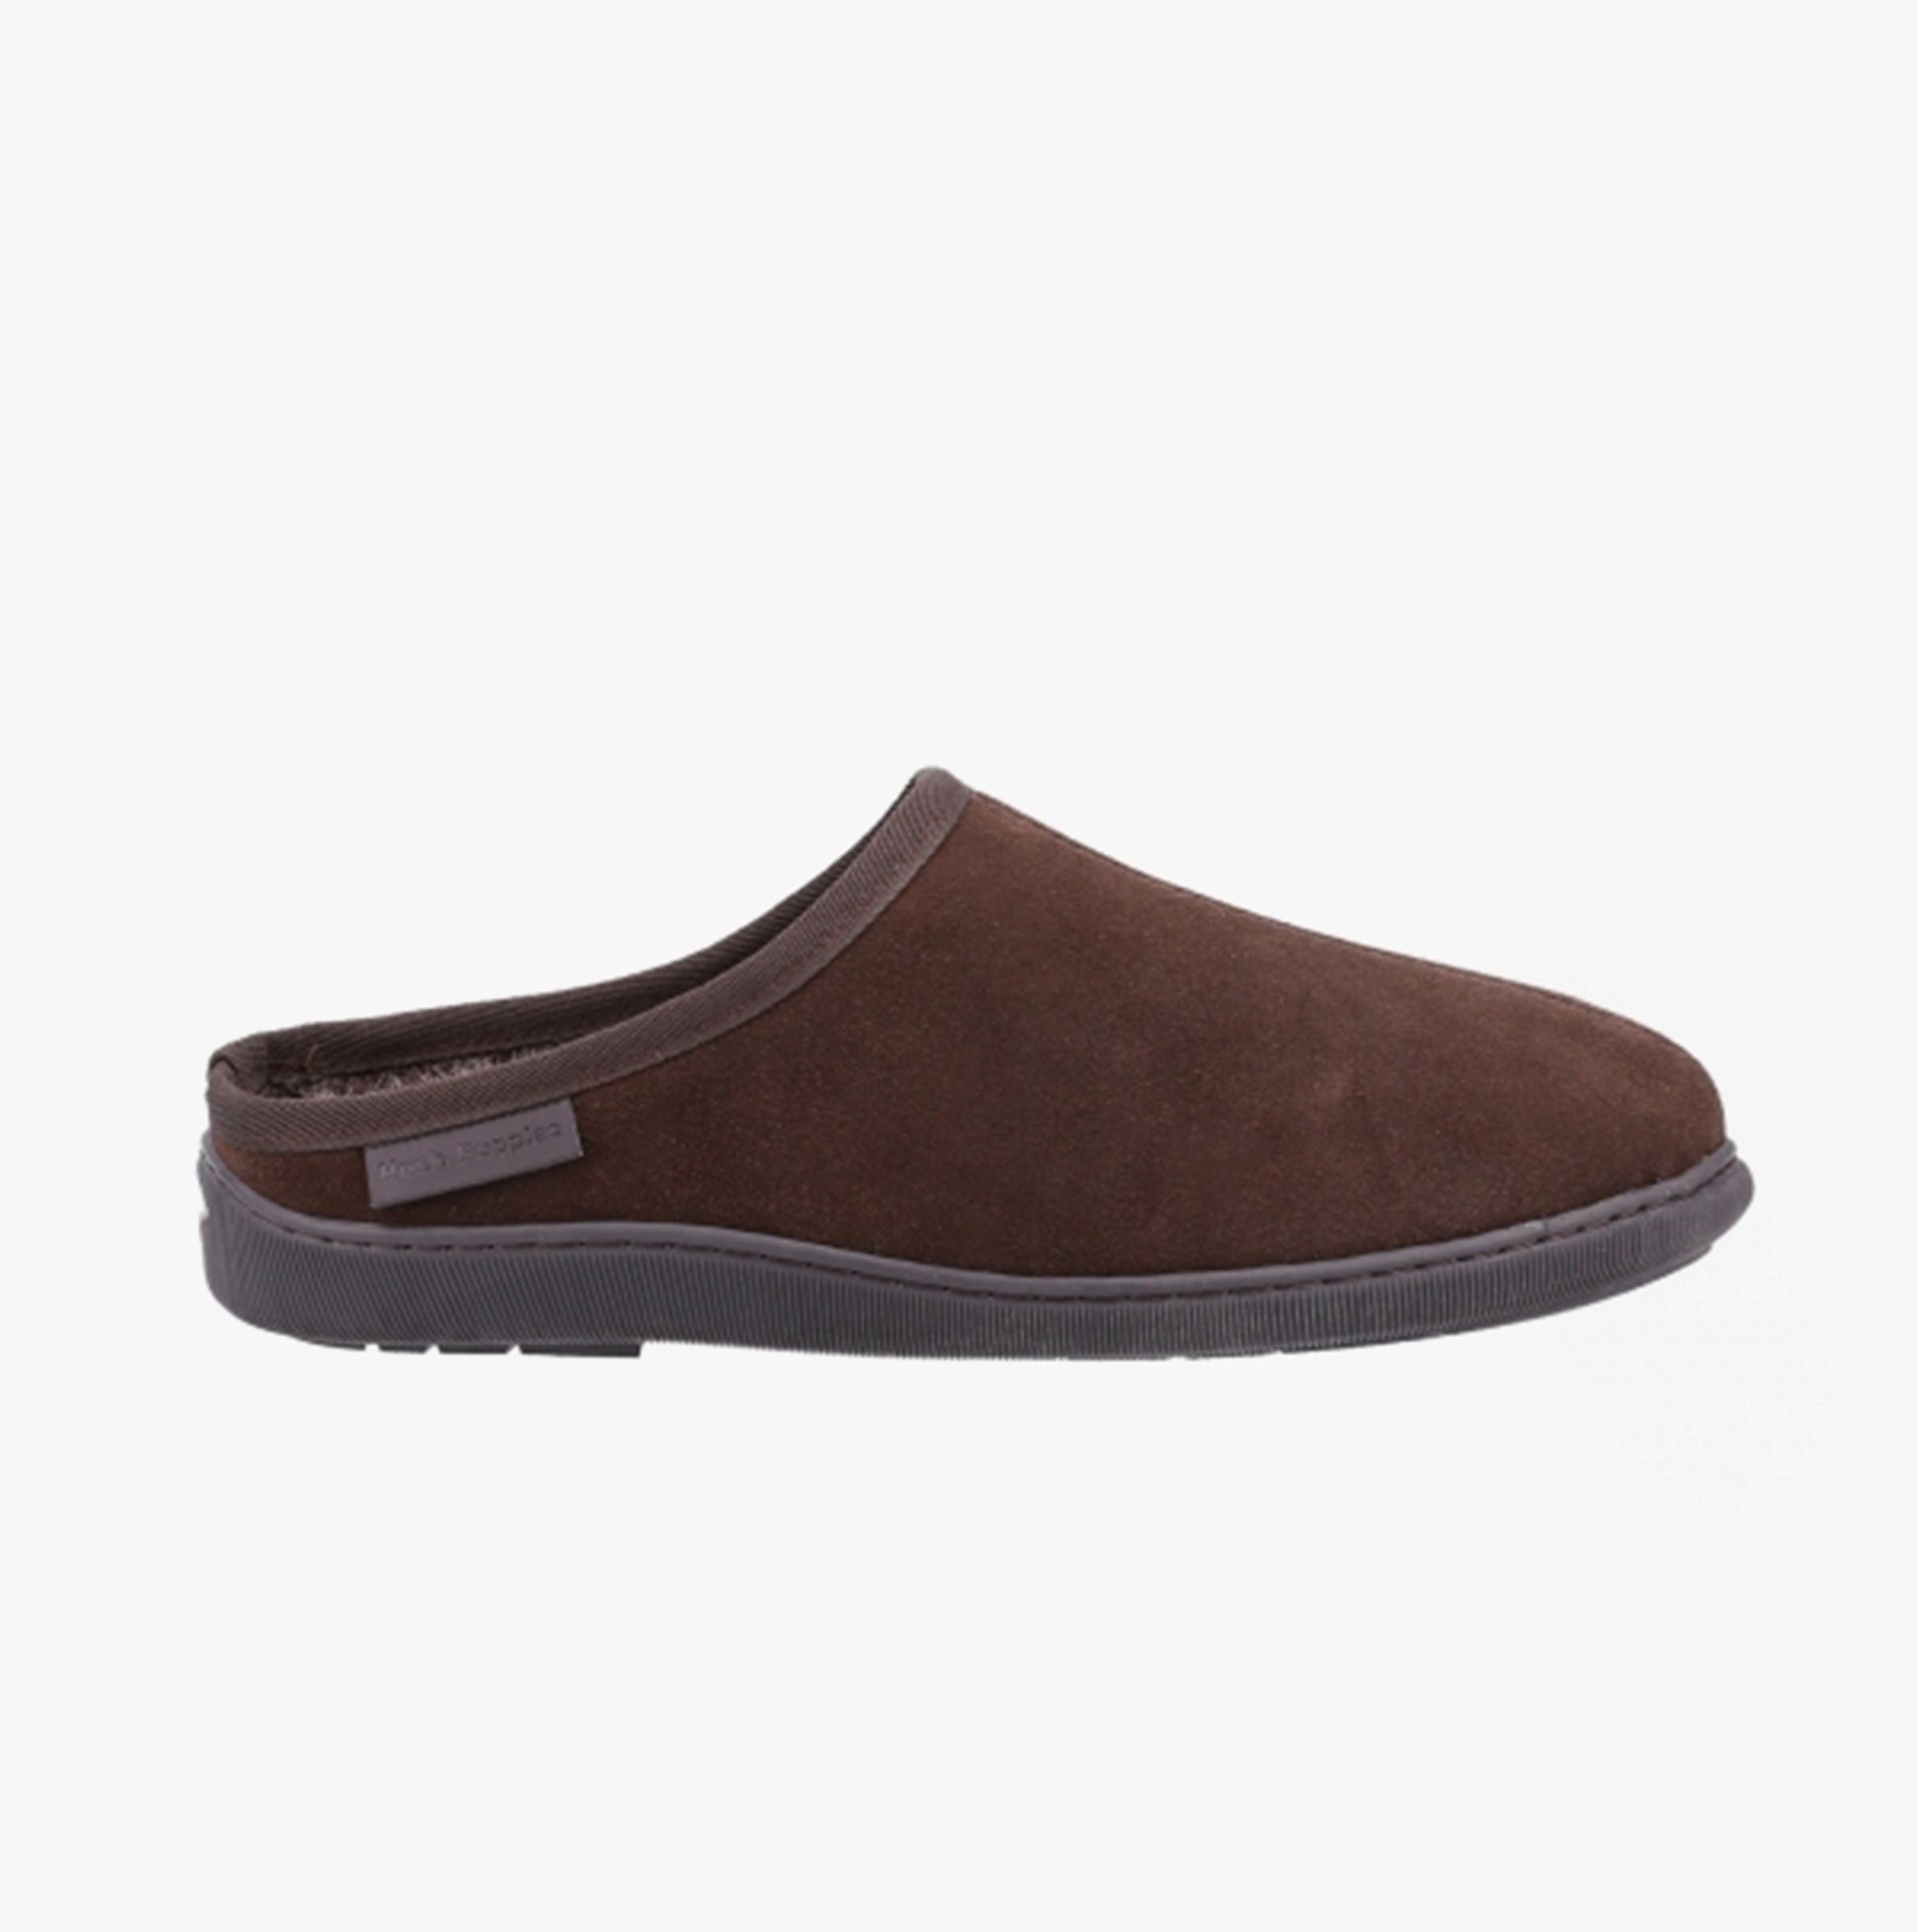 Hush Puppies ASHTON Mens Suede Leather Mule Slippers Brown | House Of ...